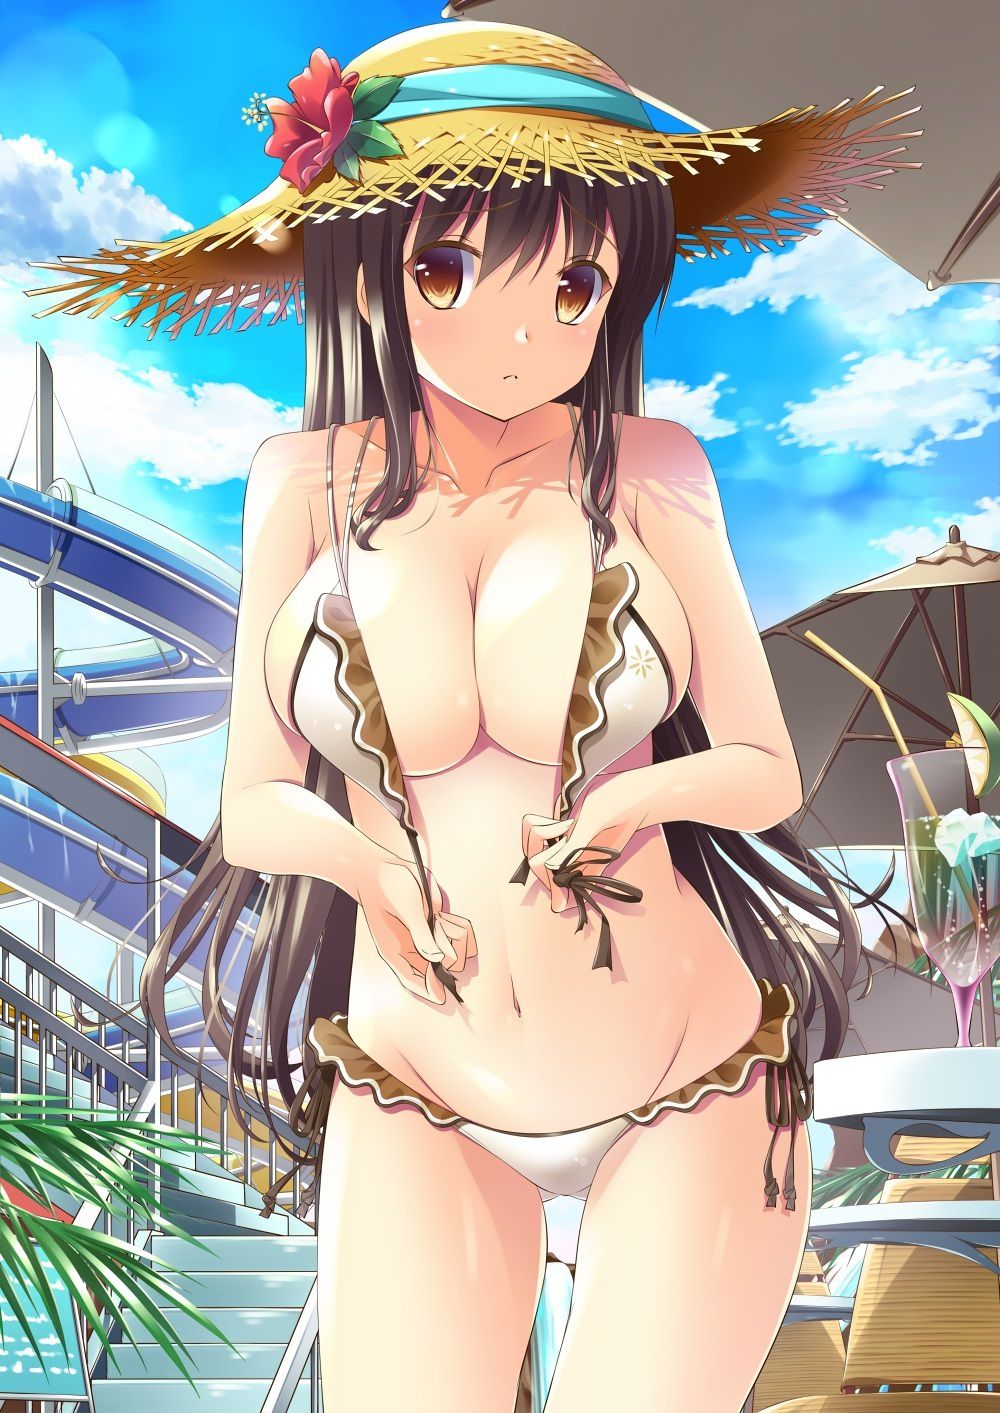 I'm wearing a straw hat 2-d girl image should (32 photos) 1